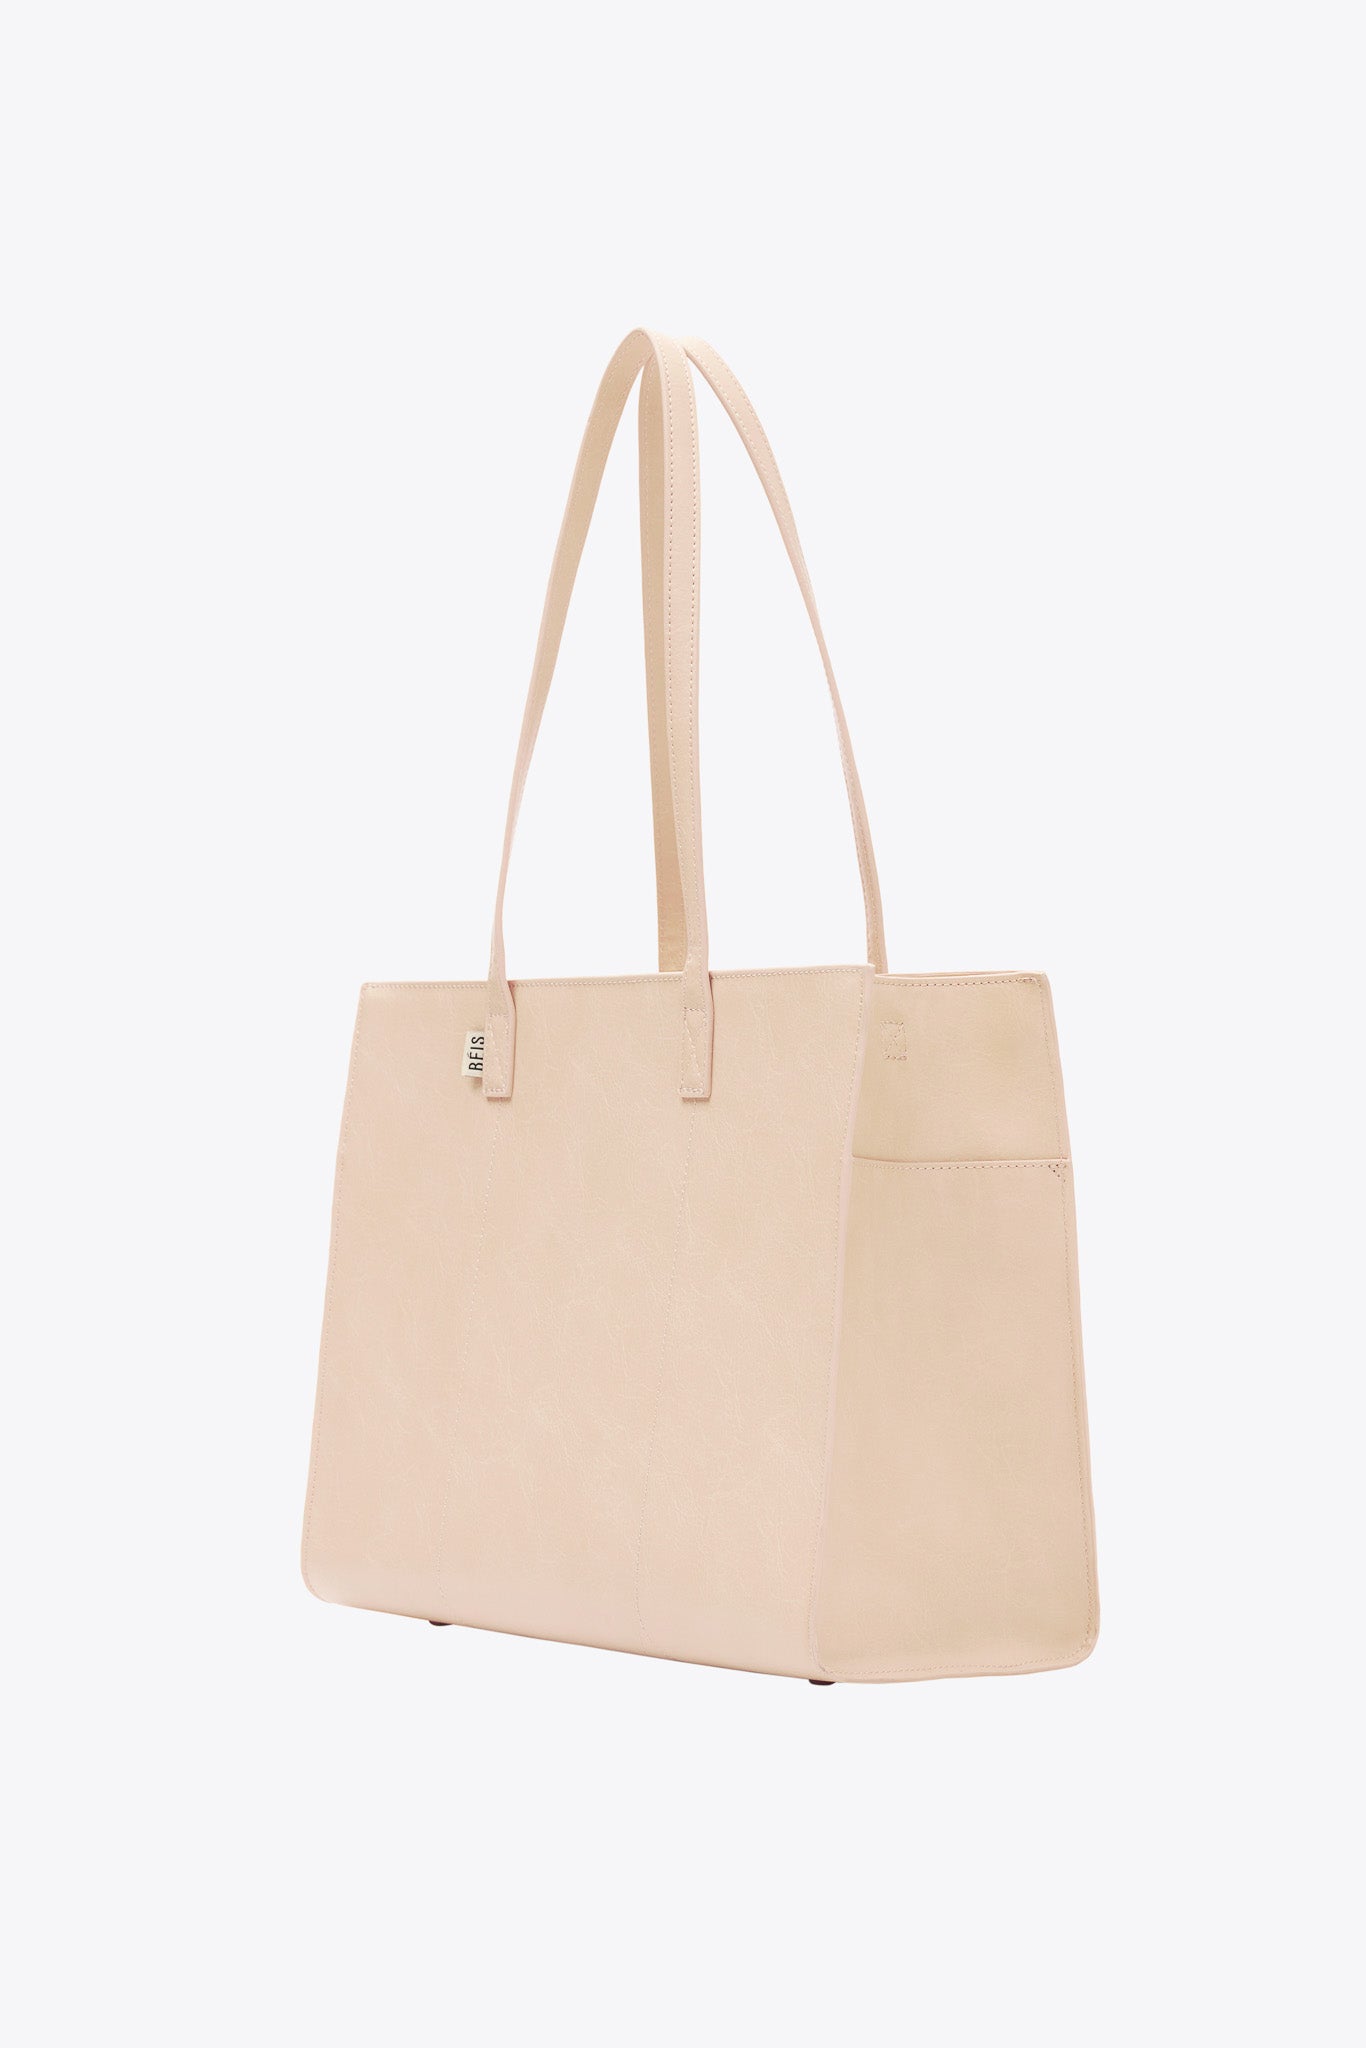 BÉIS 'The Work Tote' in Beige - Small Work Bag For Women & Laptop Tote ...